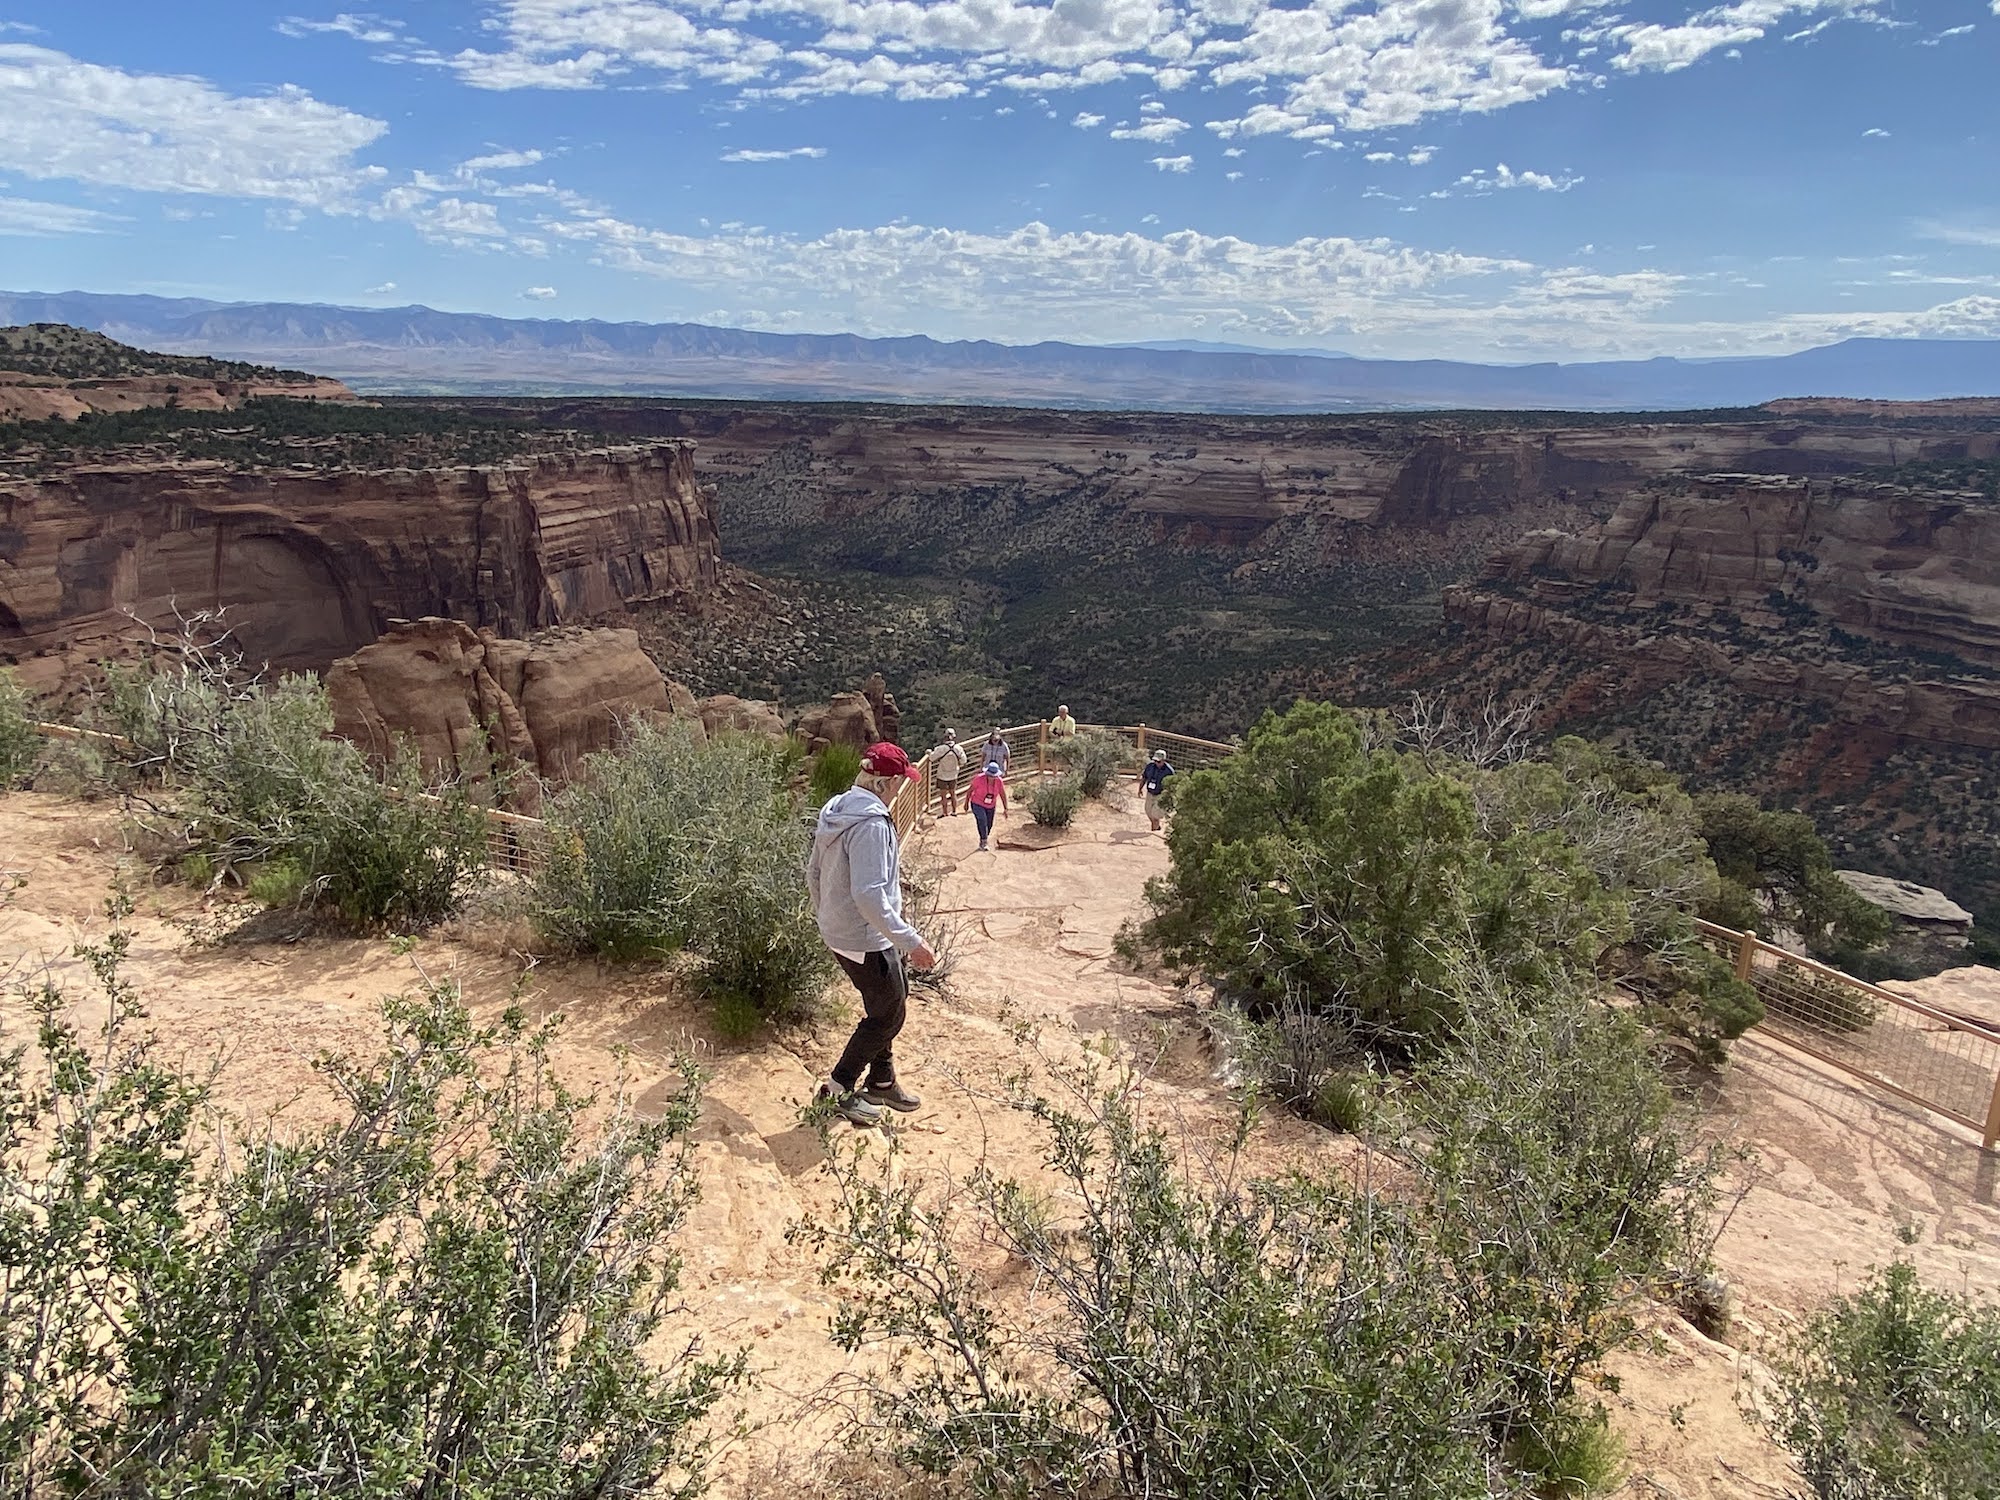 People walk to an overlook of a canyon cut in layered sandstone formations at Colorado National Monument